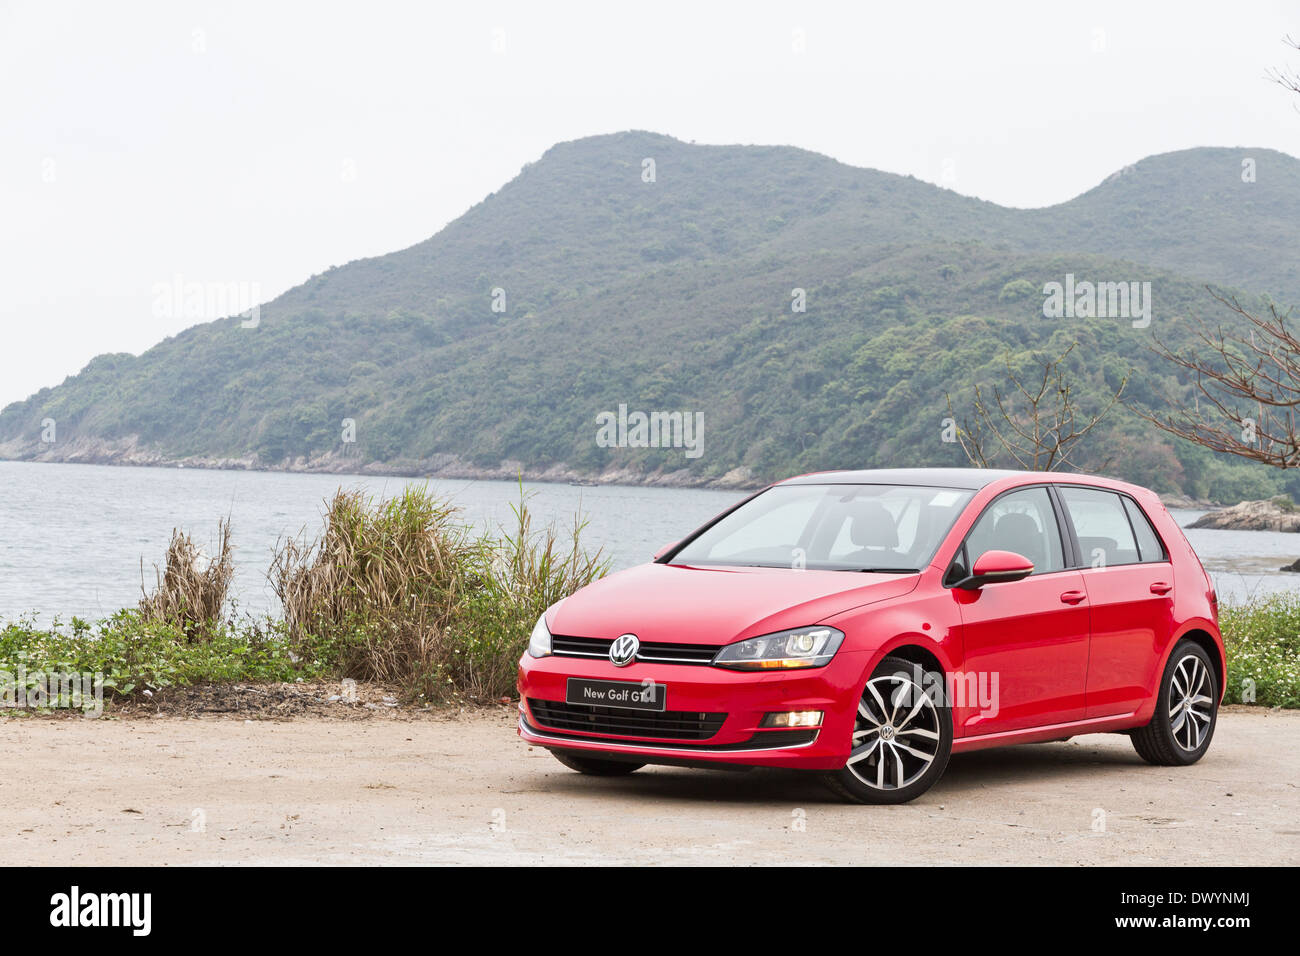 Volkswagen Golf VII GT 2013 Model with red colour. Stock Photo